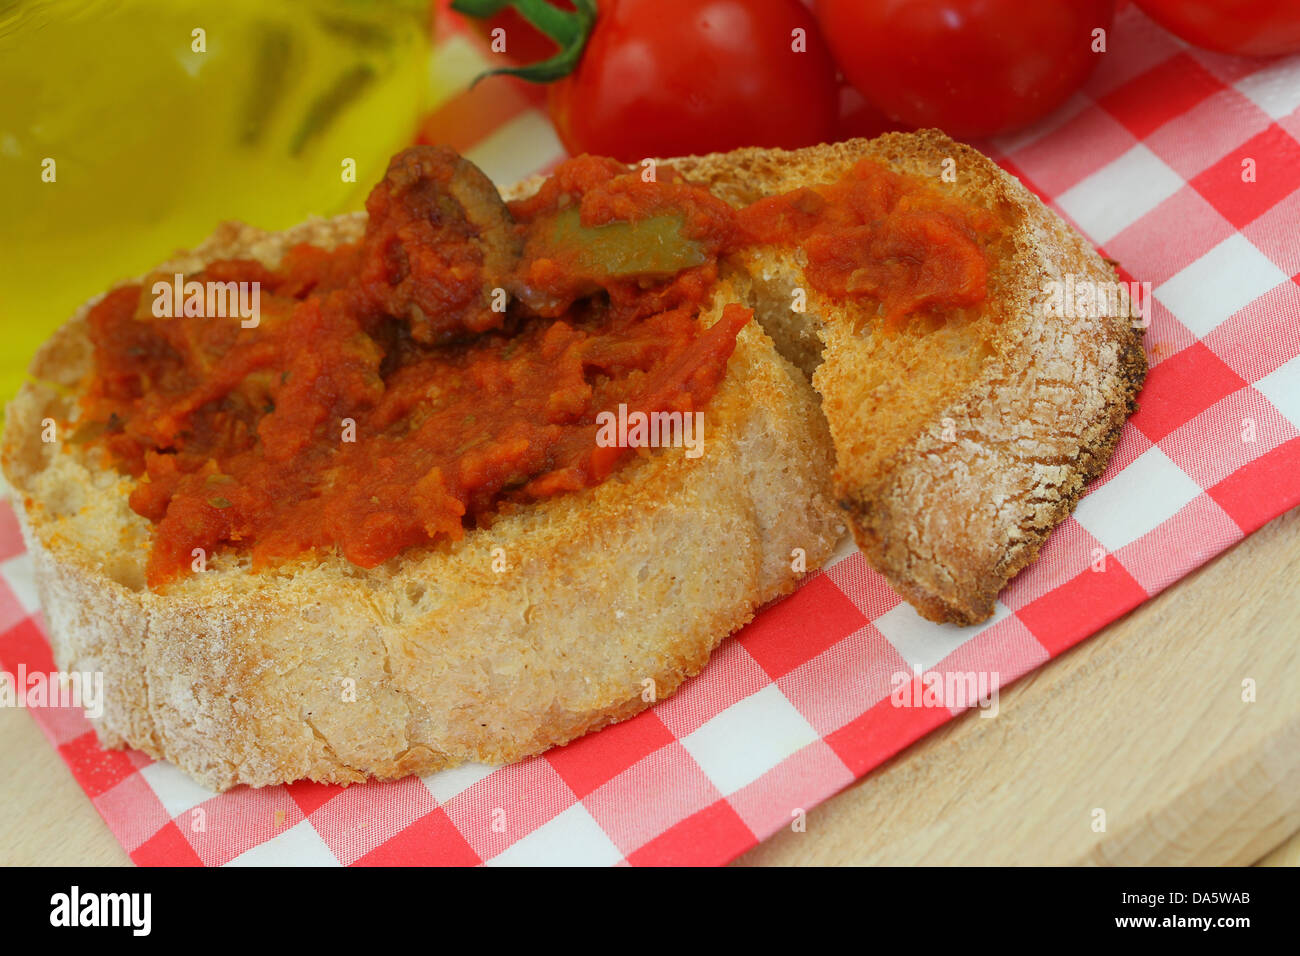 Bruschetta with tomato paste and olives Stock Photo